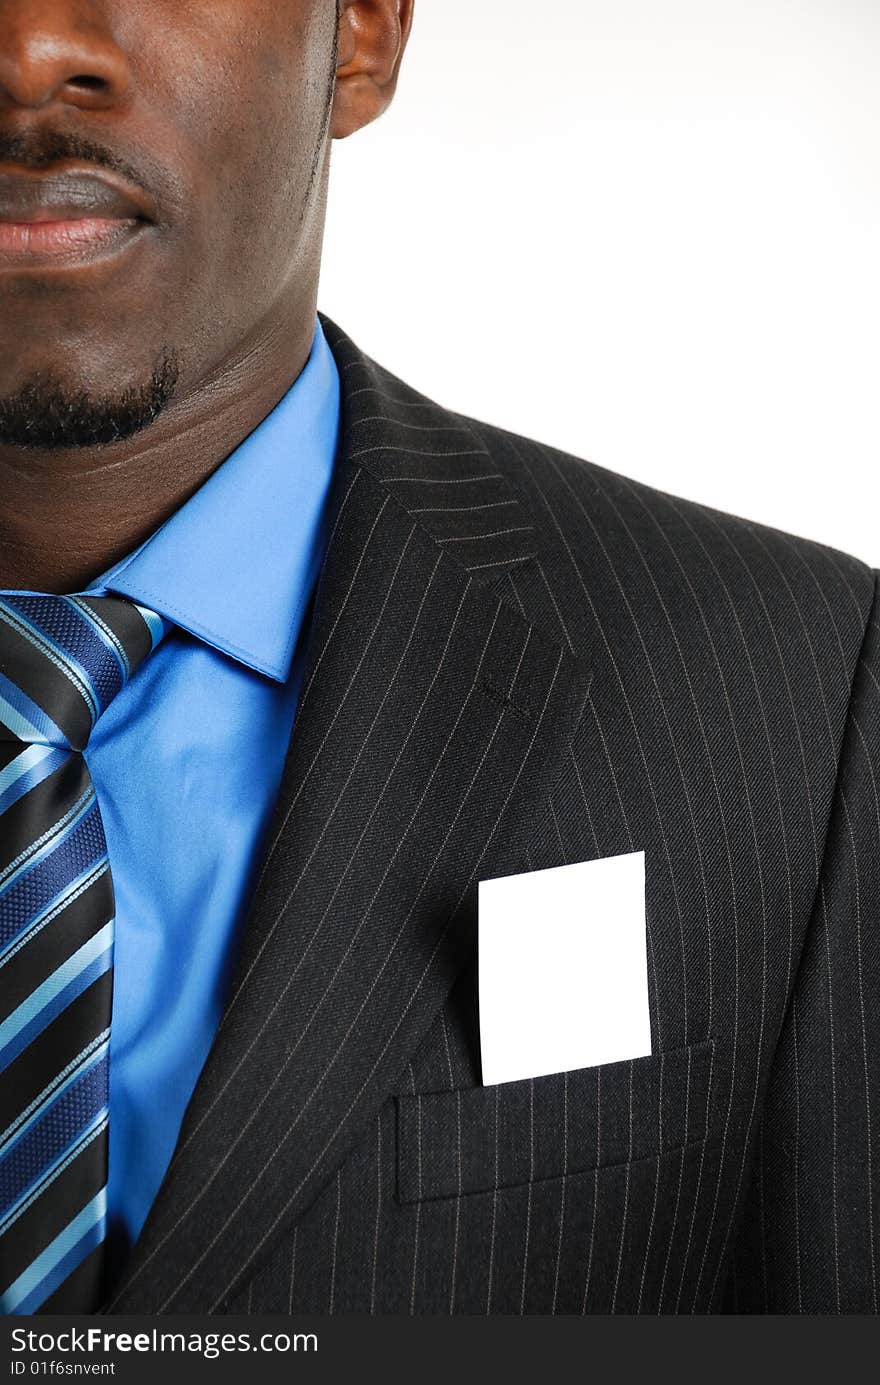 This is an image of a business man with a card inside the suit pocket. Designers can embed an image or writing on the card. This is an image of a business man with a card inside the suit pocket. Designers can embed an image or writing on the card.